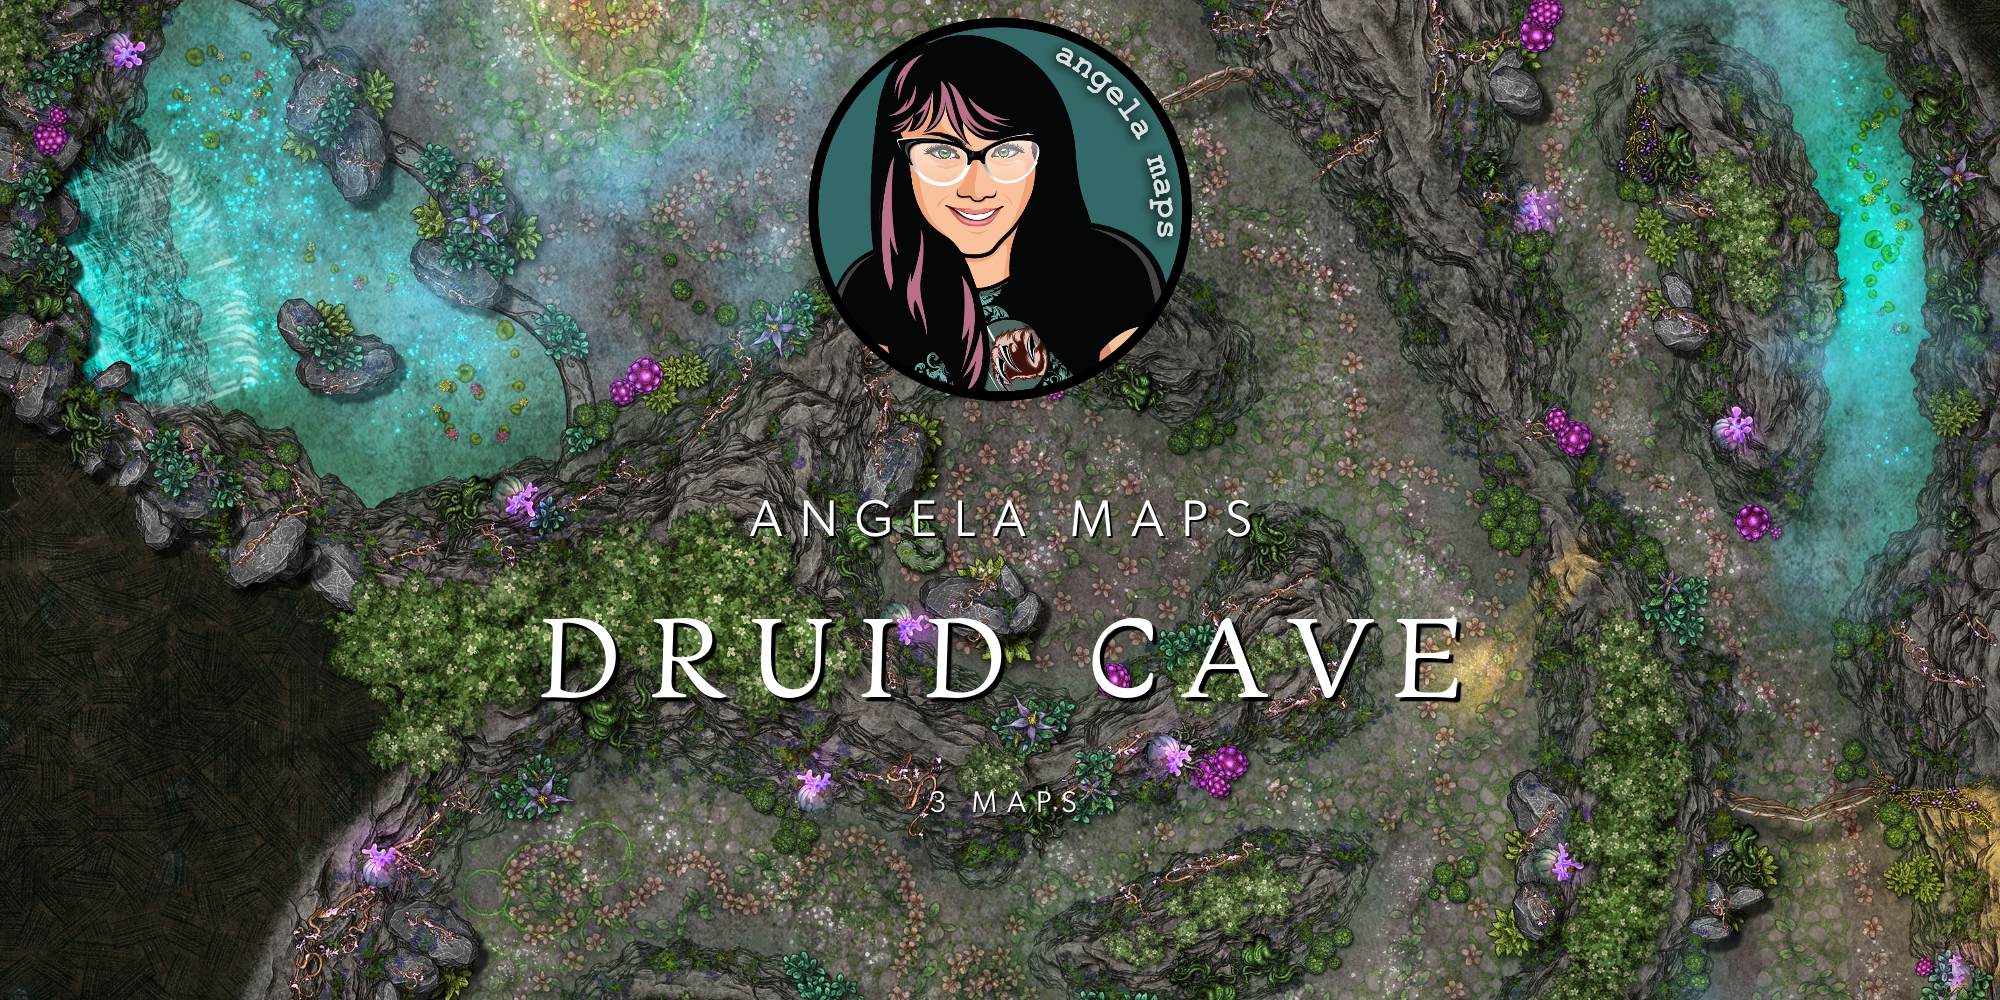 Druid Cave battle map by Angela Maps